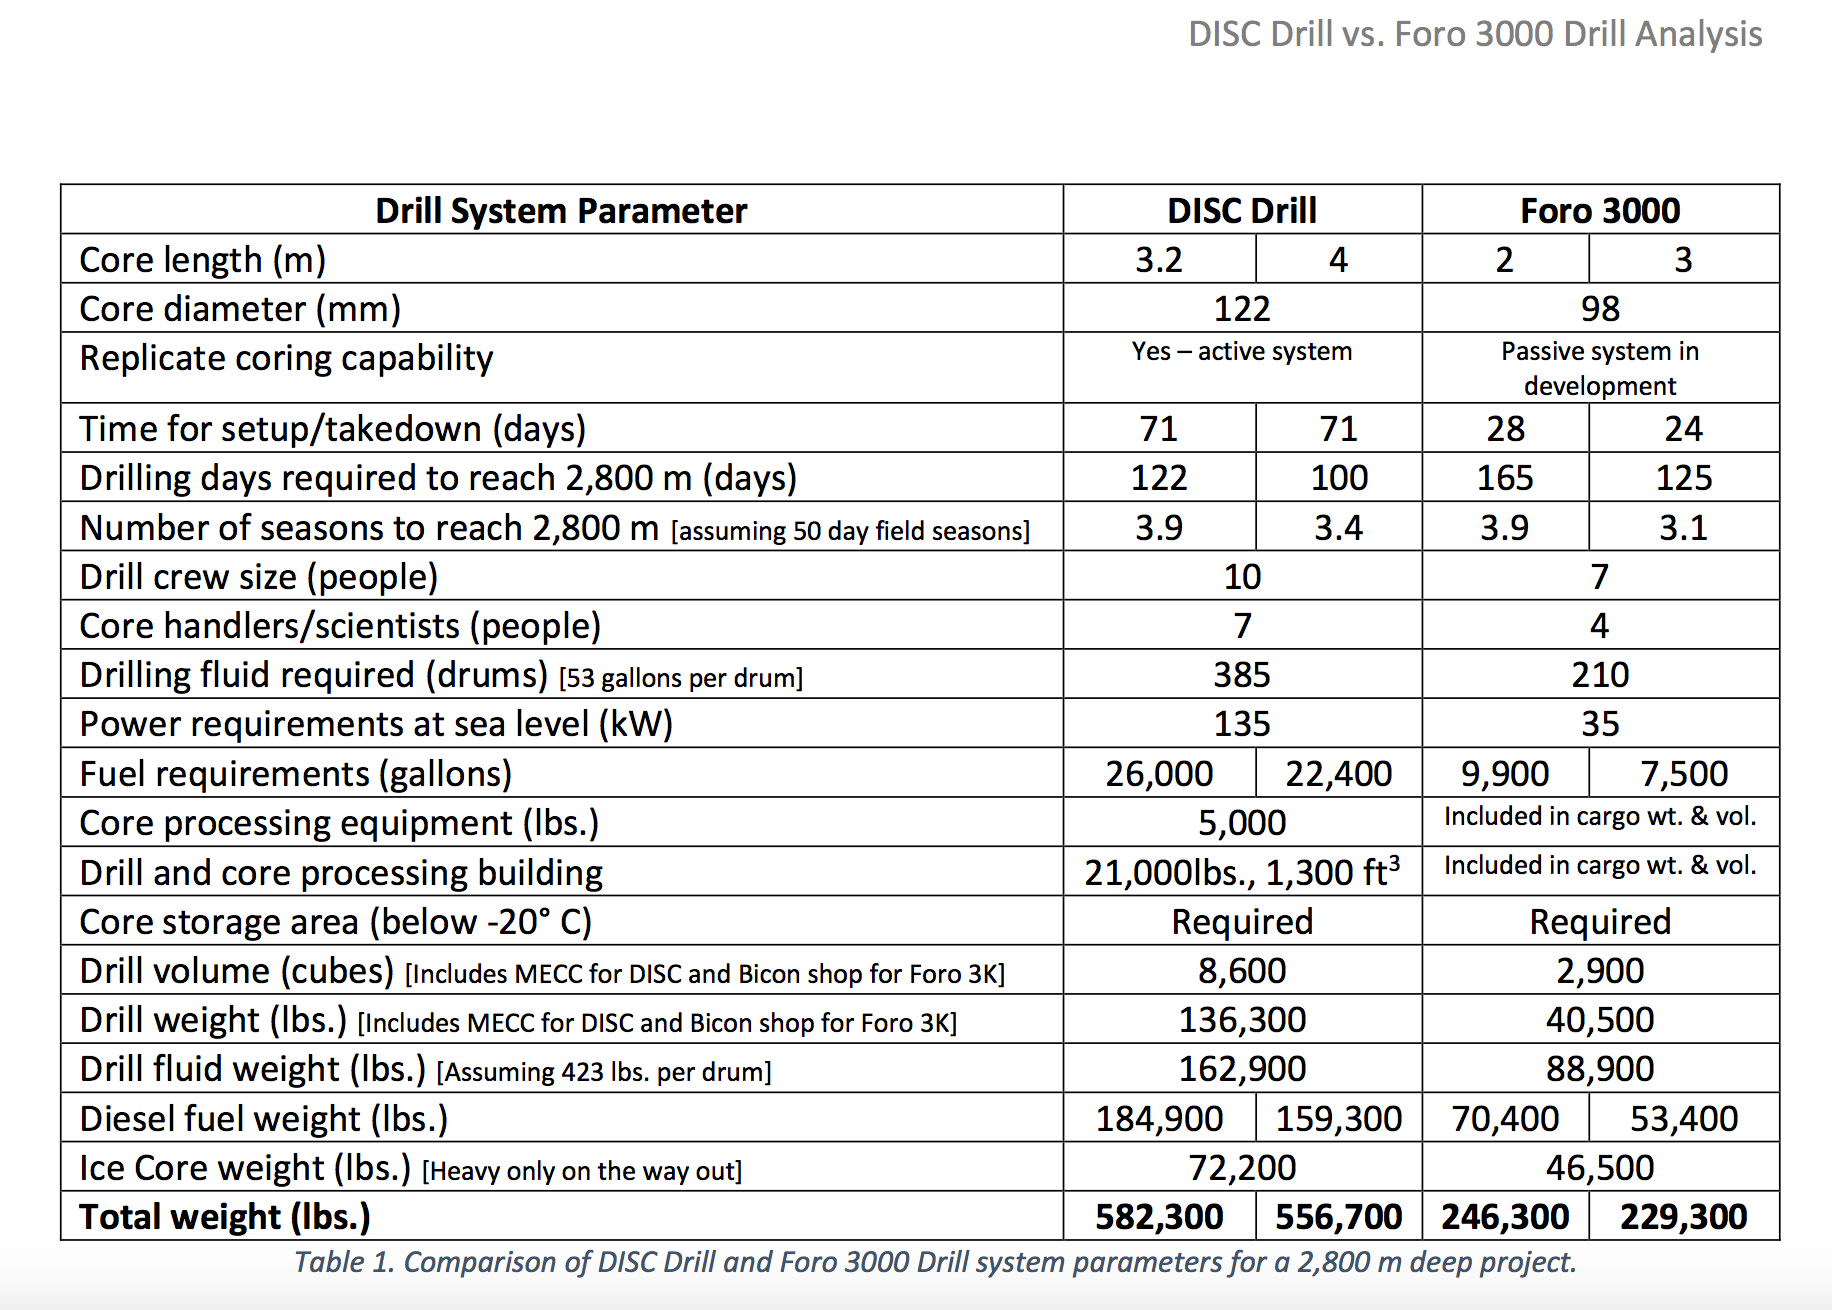 Table 1. Comparison of DISC Drill and Foro 3000 Drill system parameters for a 2,800 m deep project